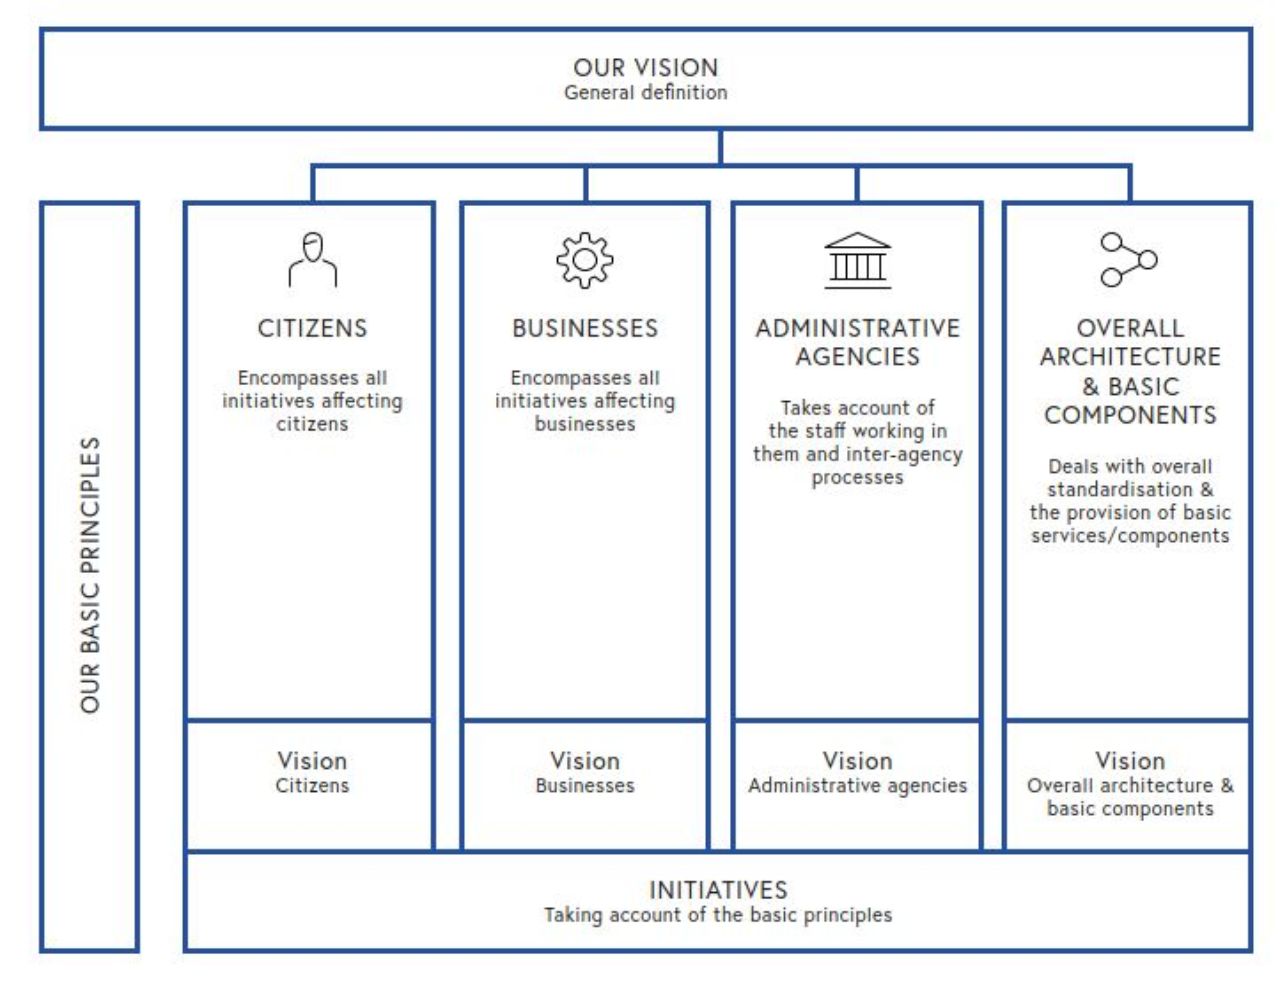 Picture shows the Impact Areas of the eGovernment strategy - designation of the fields of action "Our vision", "Our principles" and the associated initiatives. Citizens: include all initiatives that affect citizens Businesses: include all initiatives that affect businesses Administration: takes into account its own employees as well as cross-administration processes Overall architecture and Basic components: supports overarching standardisation and provision of basic services/components